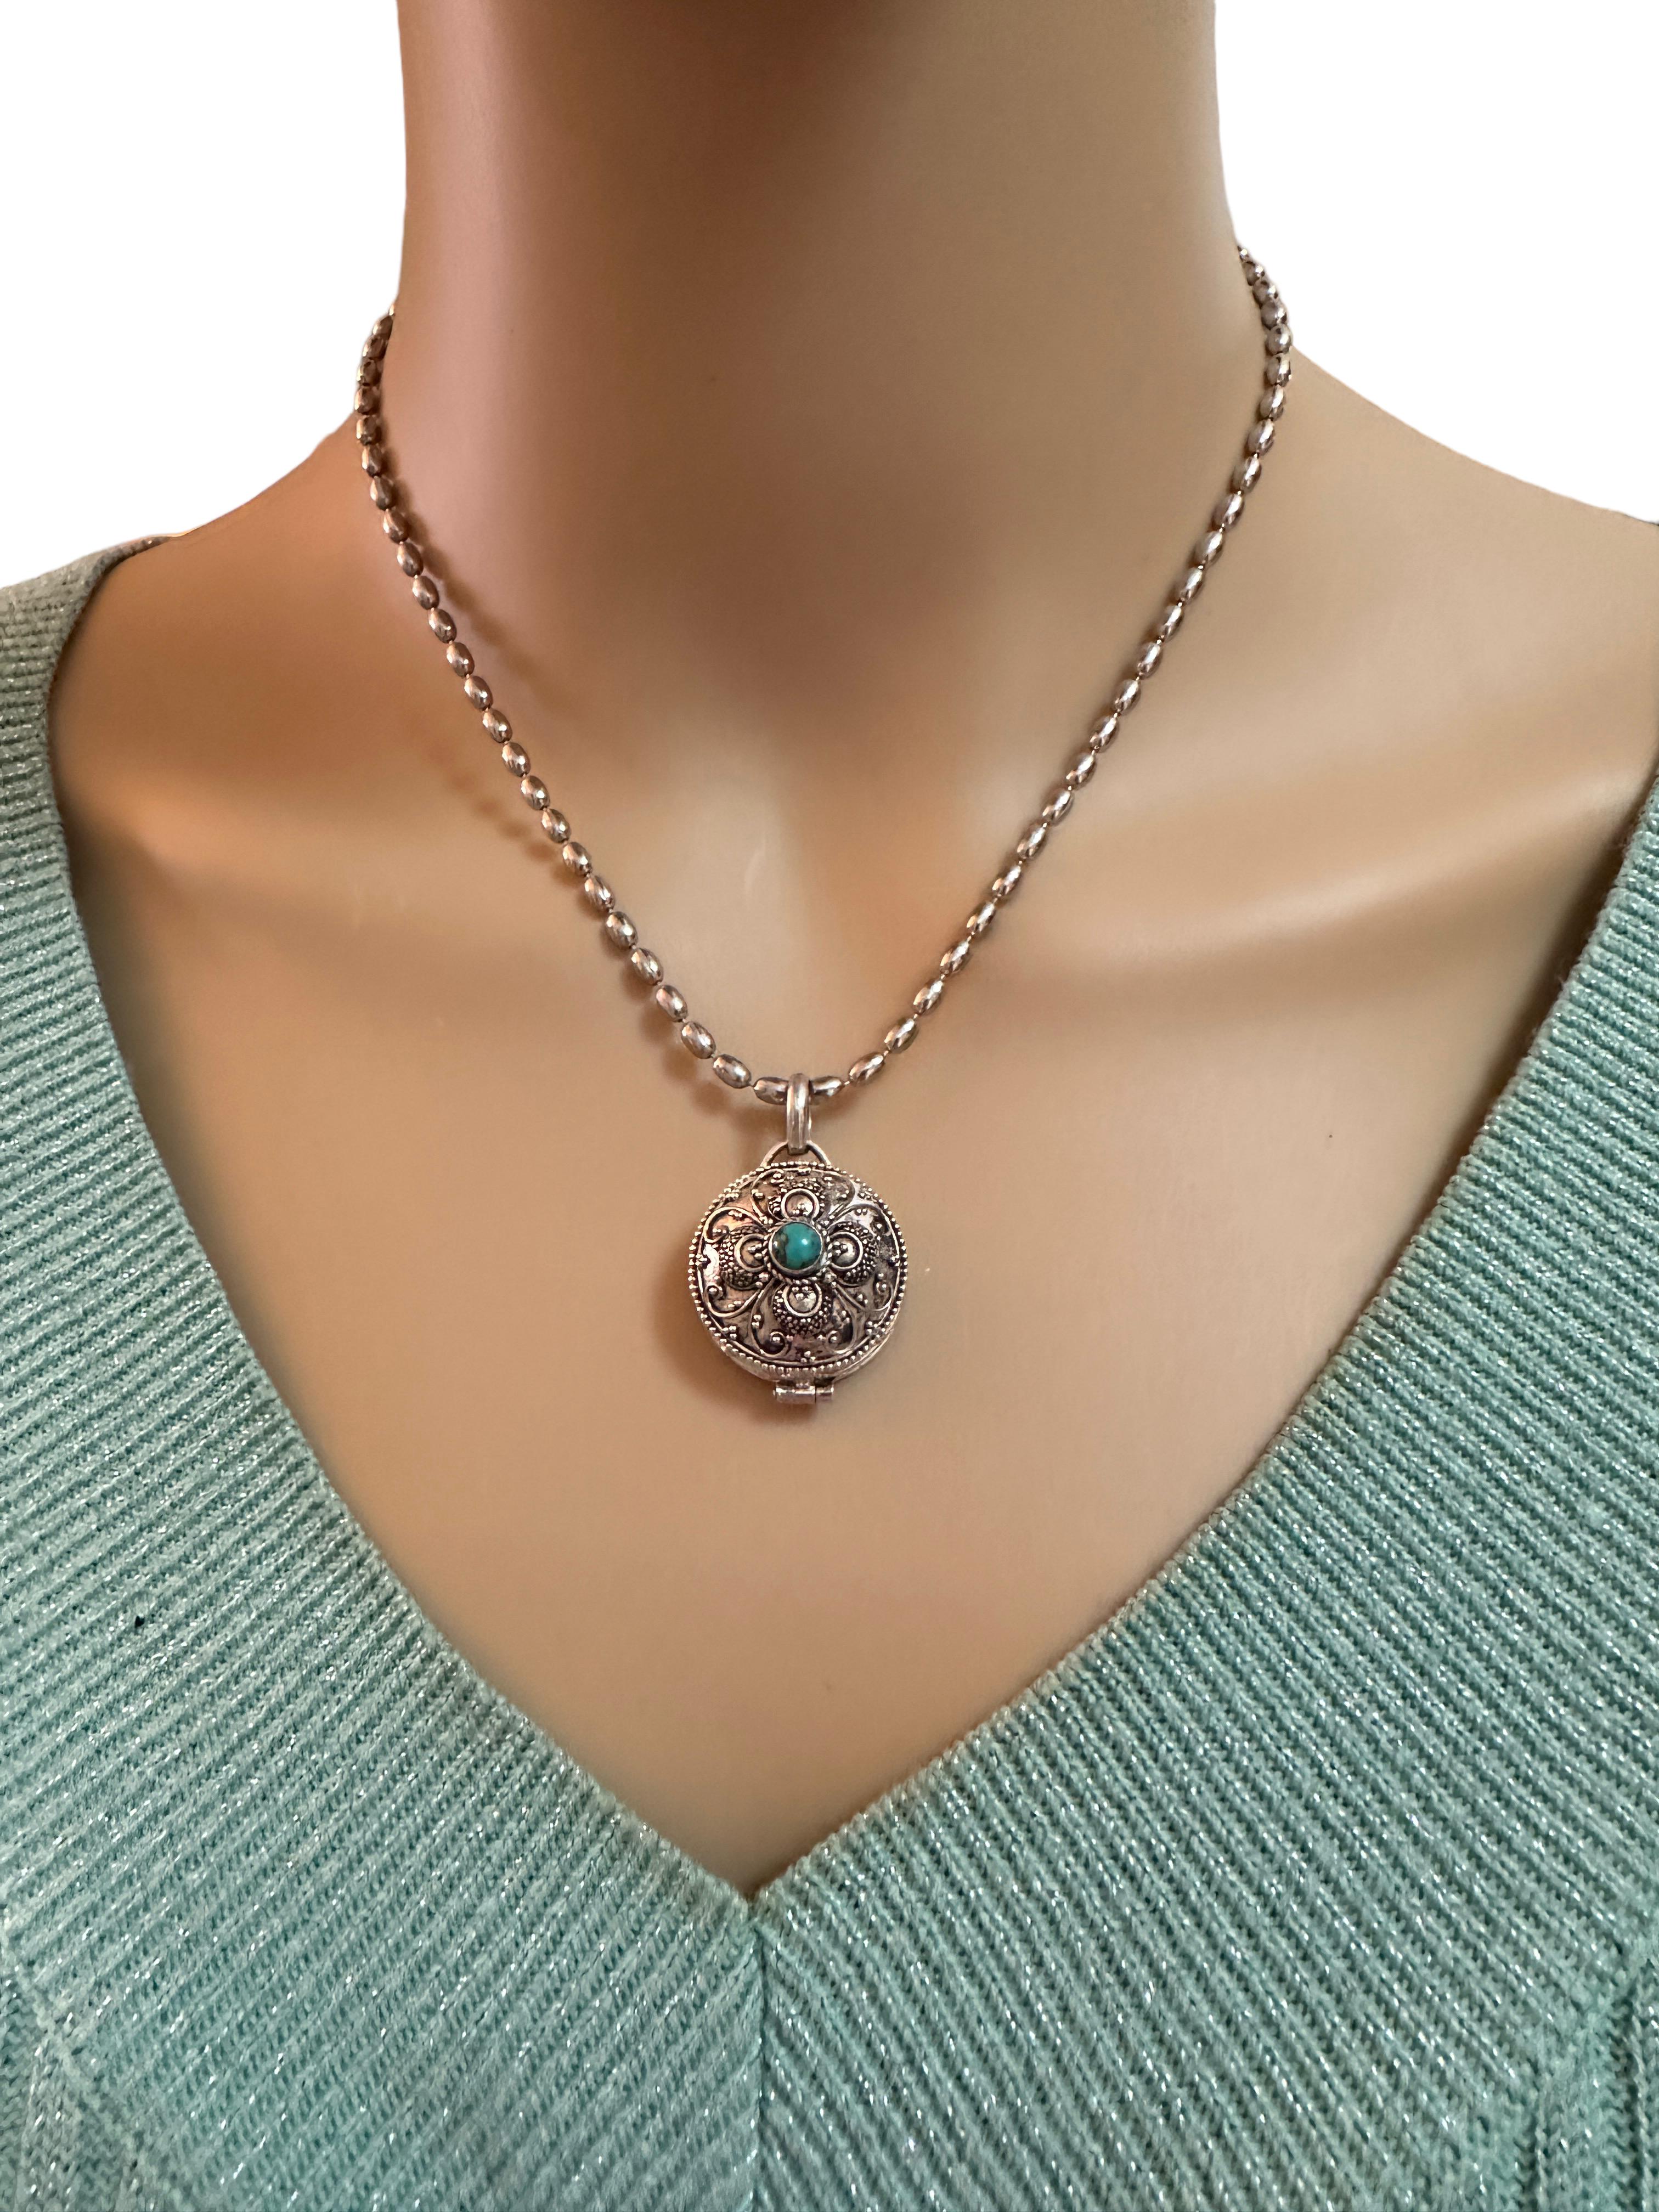 Vintage 925 Sterling Silver & Turquoise Pill Box Locket with Chain Necklace For Sale 1